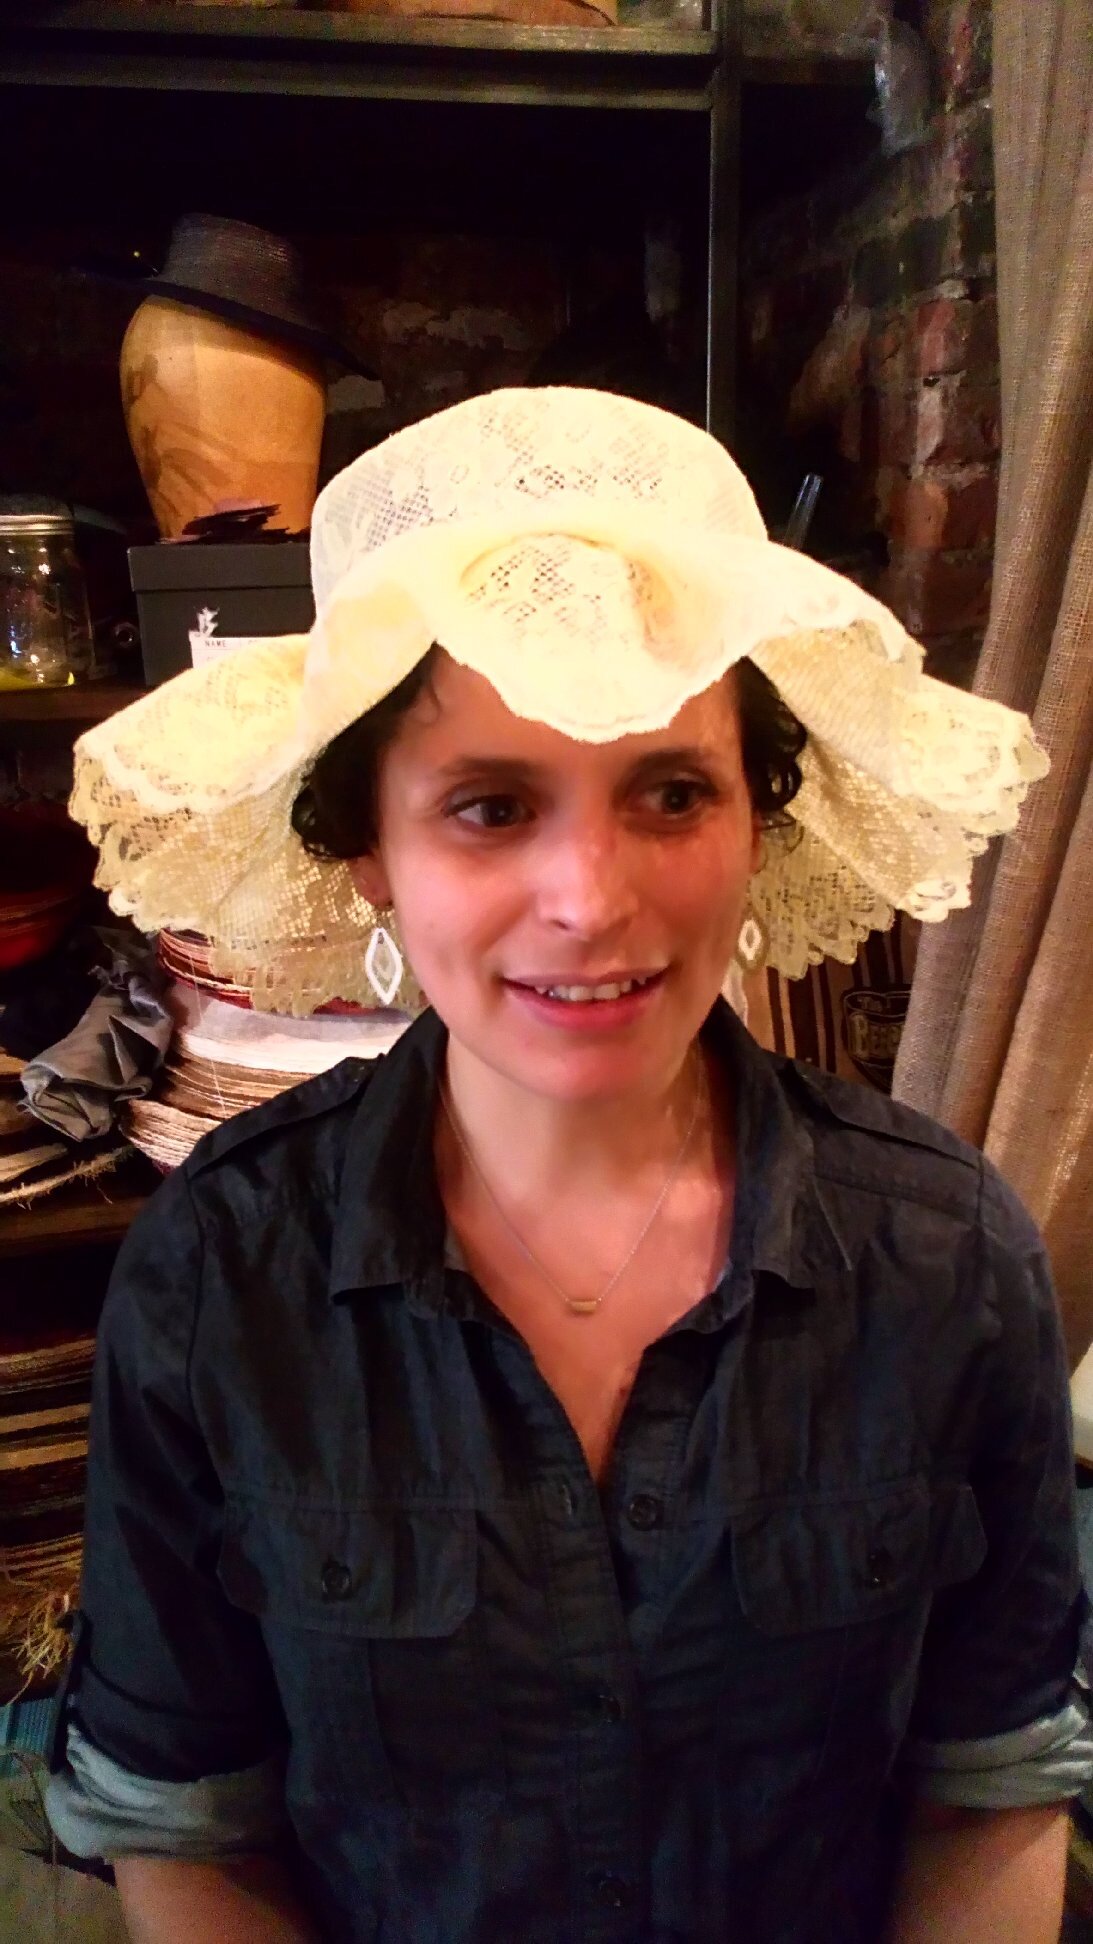 We custom built the bridesmaids' lace hats. This is the final hat.